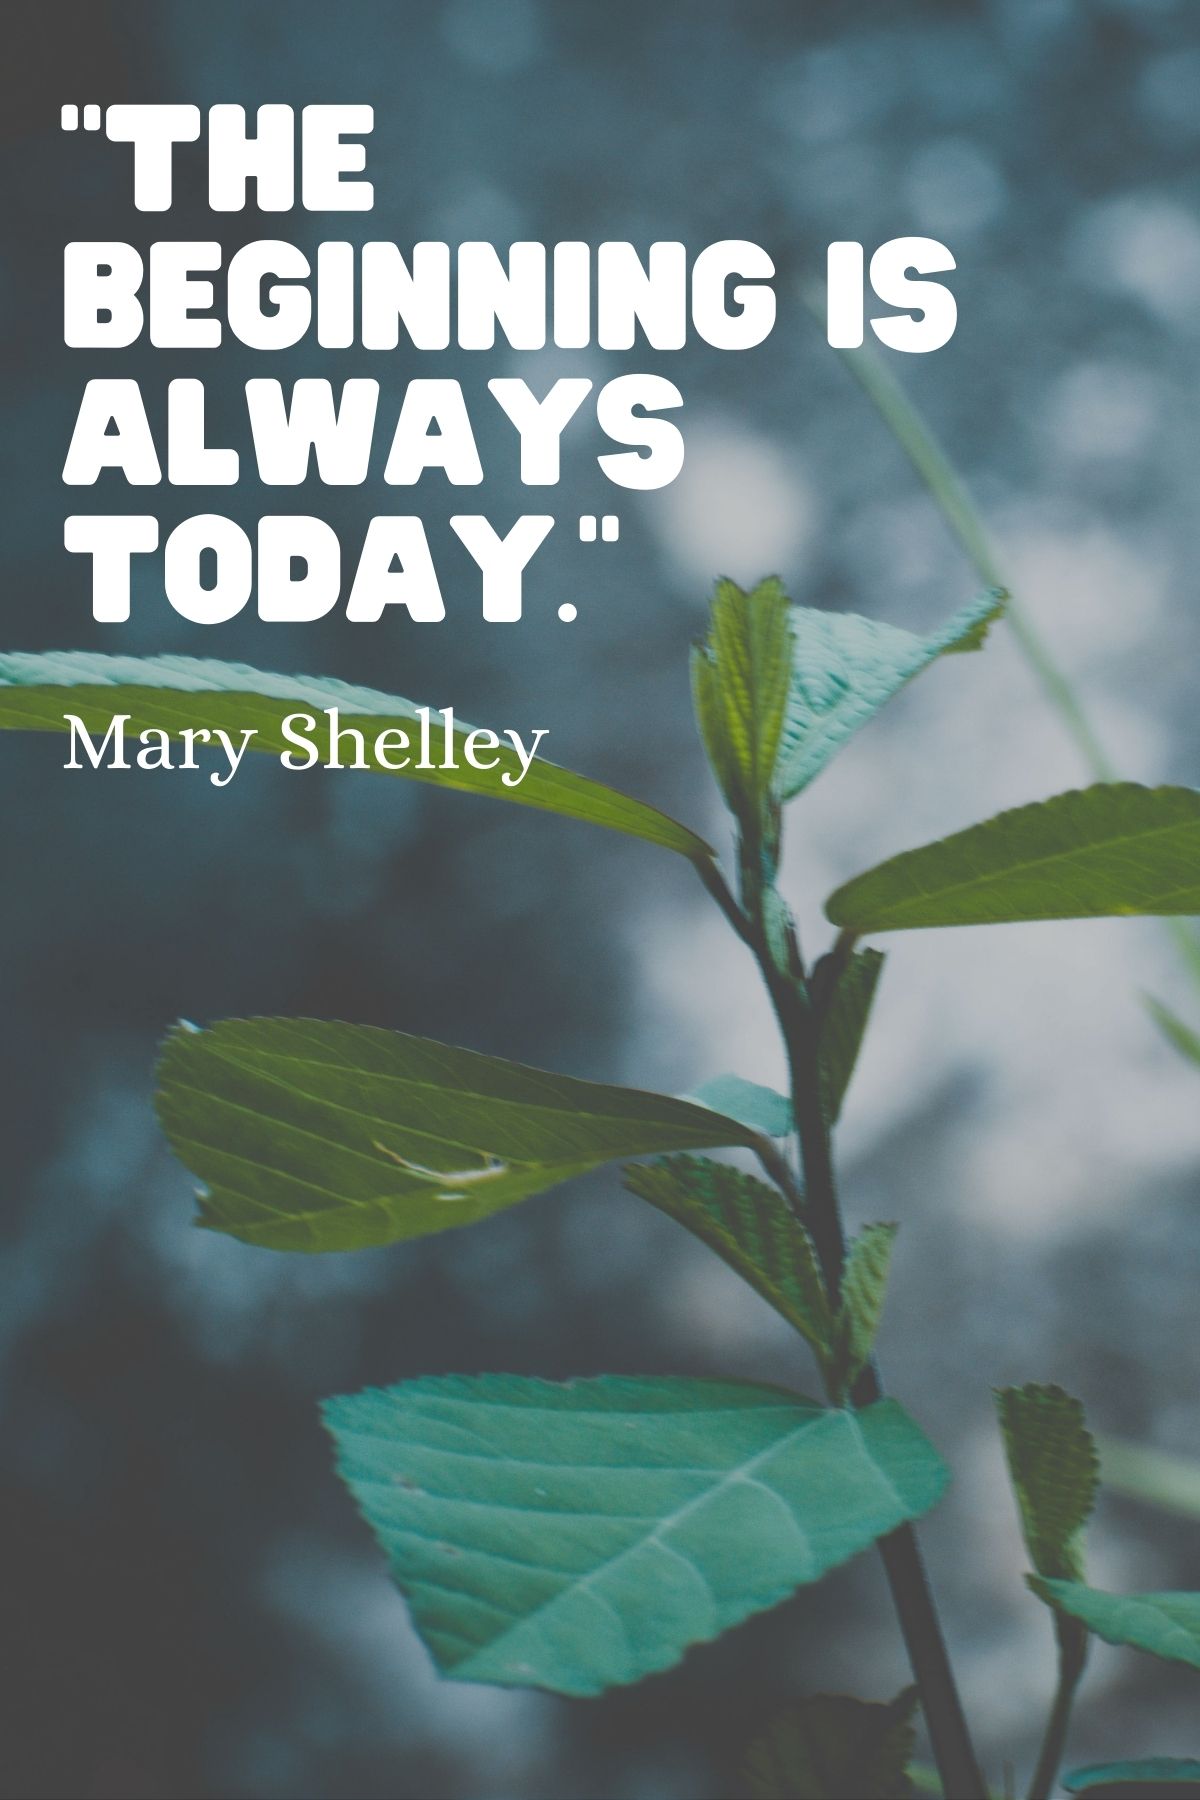 “The beginning is always today.” – Mary Shelley  Fresh beginning quote